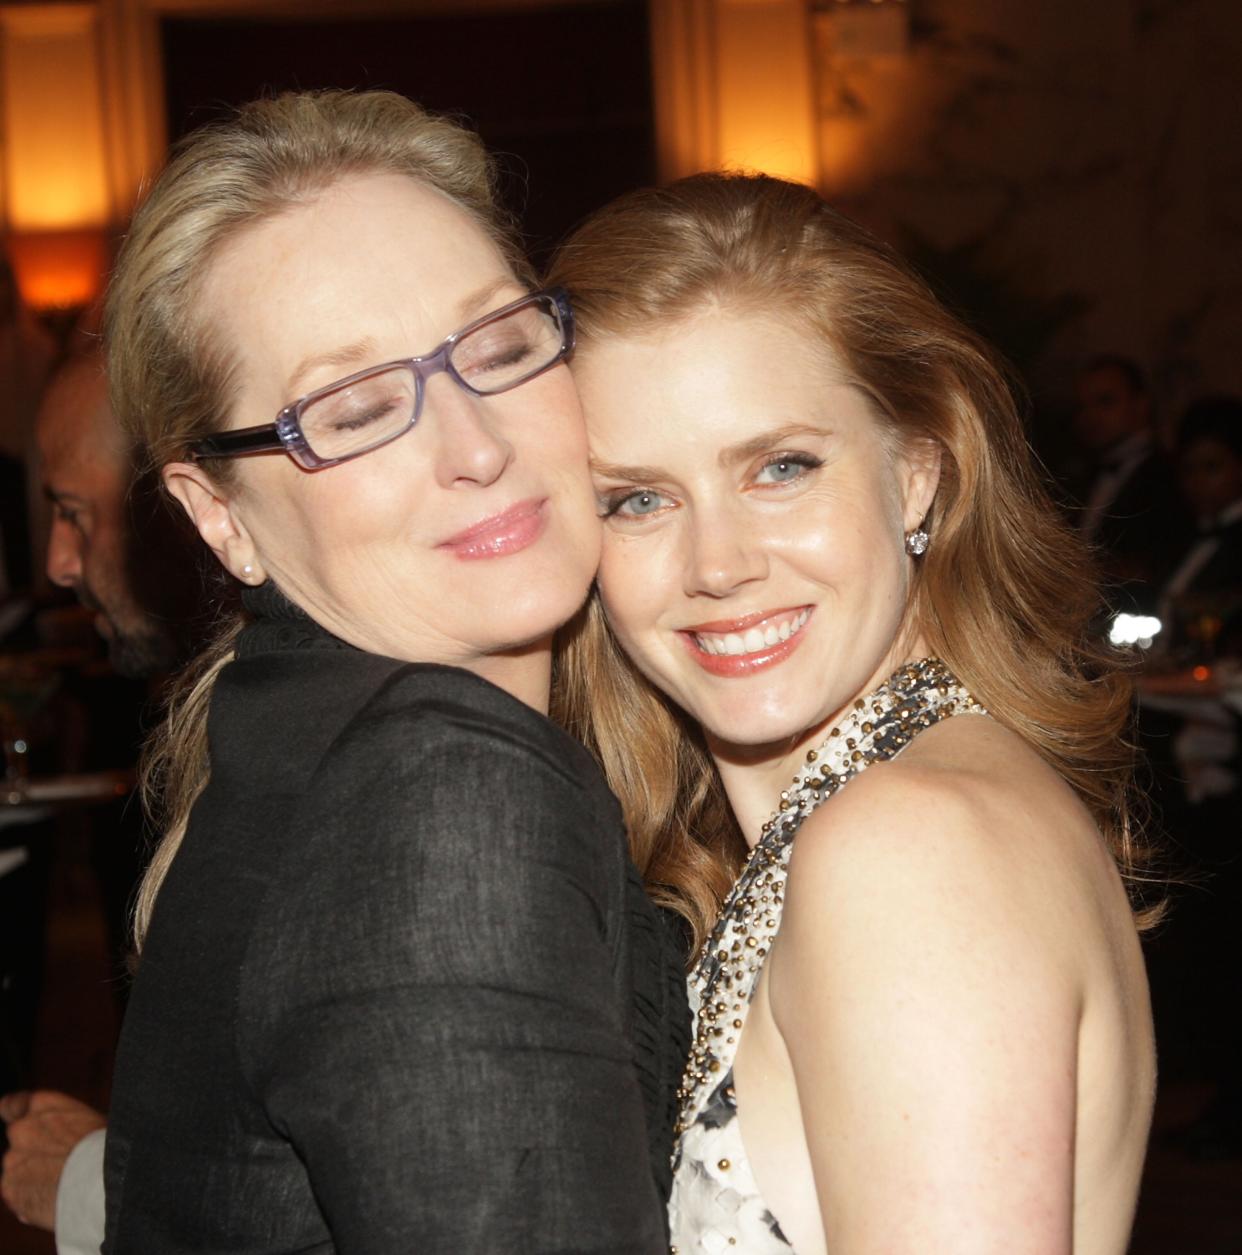 Meryl Streep and Amy Adams played Julia Child and Julie Powell respectively in the 2009 film Julie & Julia (Getty Images)